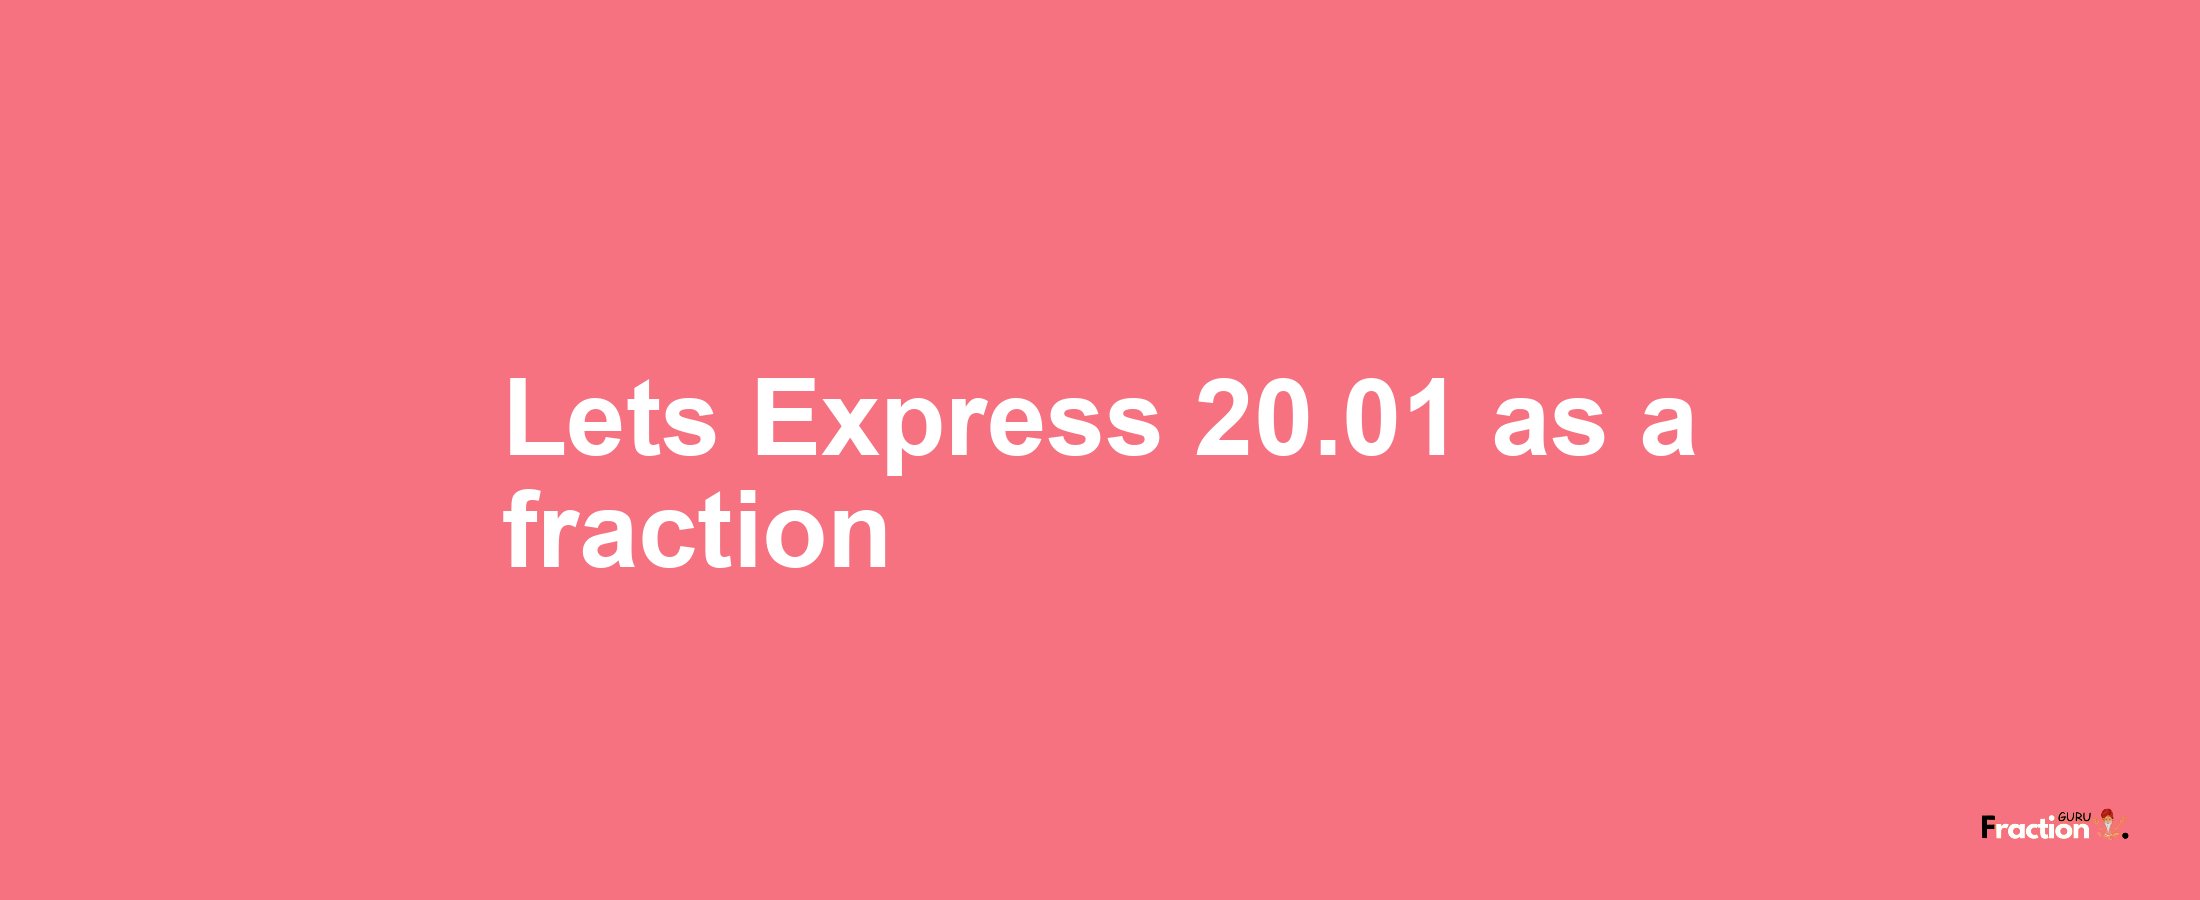 Lets Express 20.01 as afraction